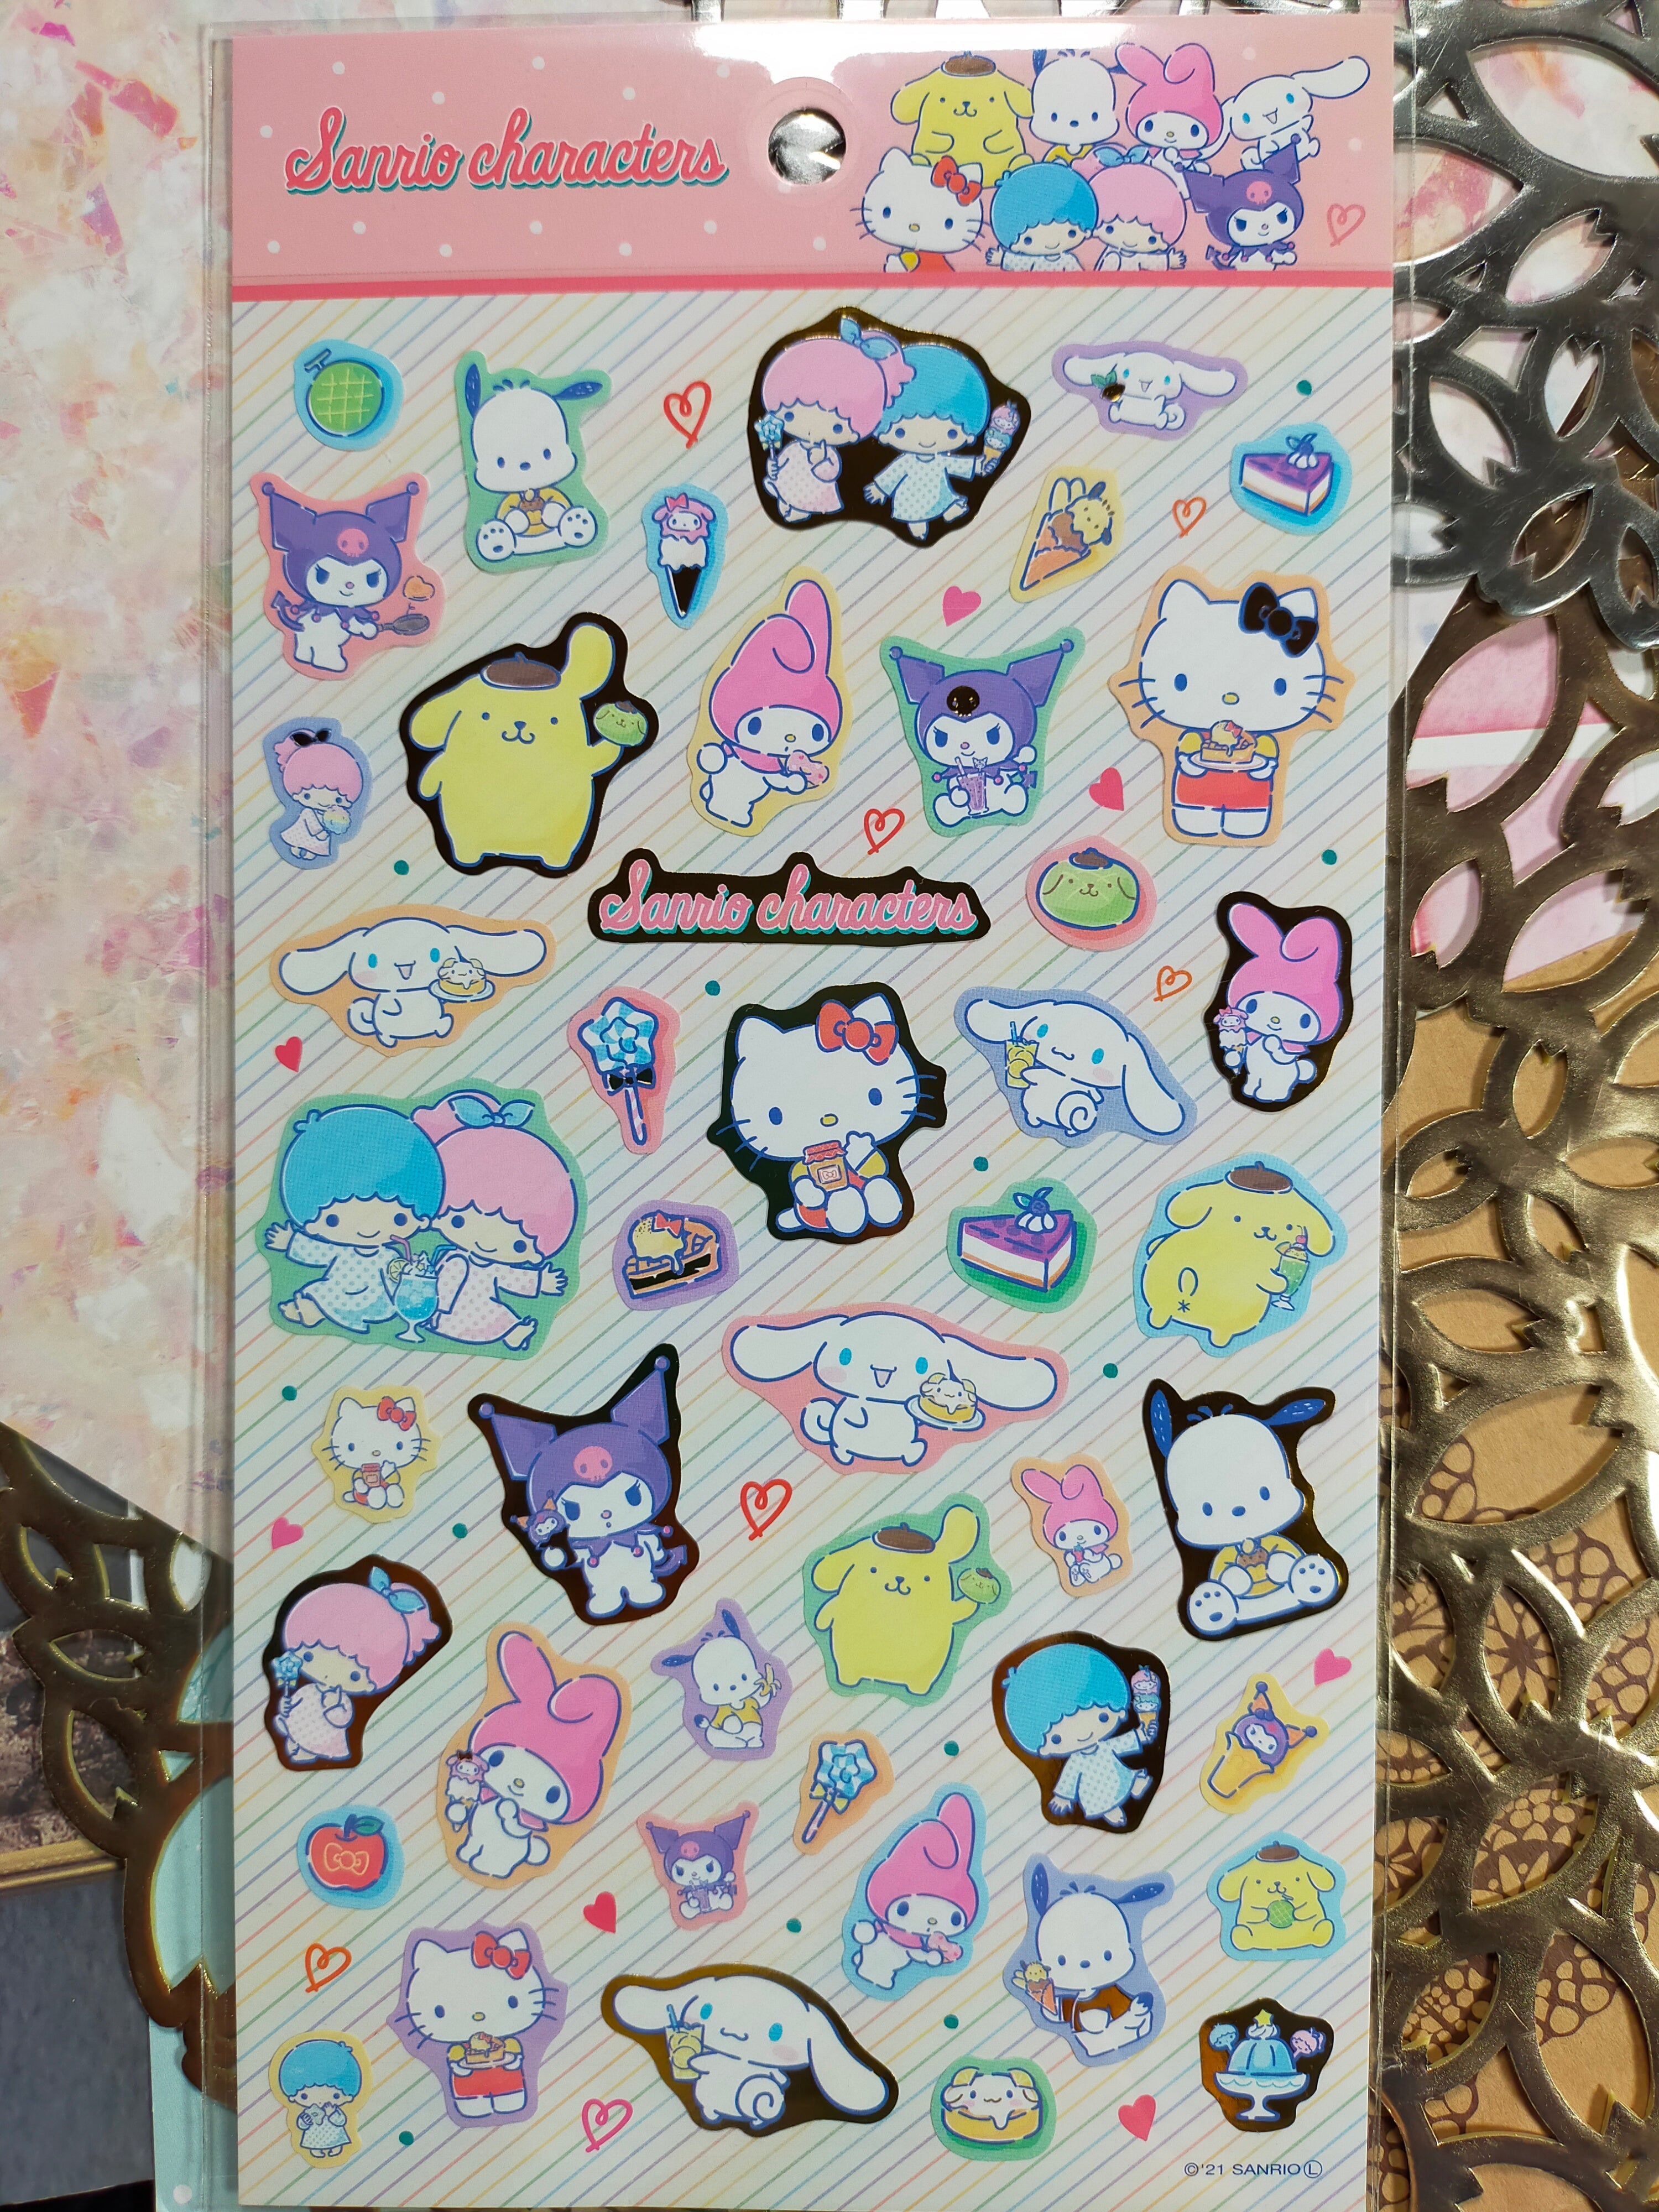 Sanrio All Star Characters Sticker Hello Kitty My Melody Pompompurin Japan